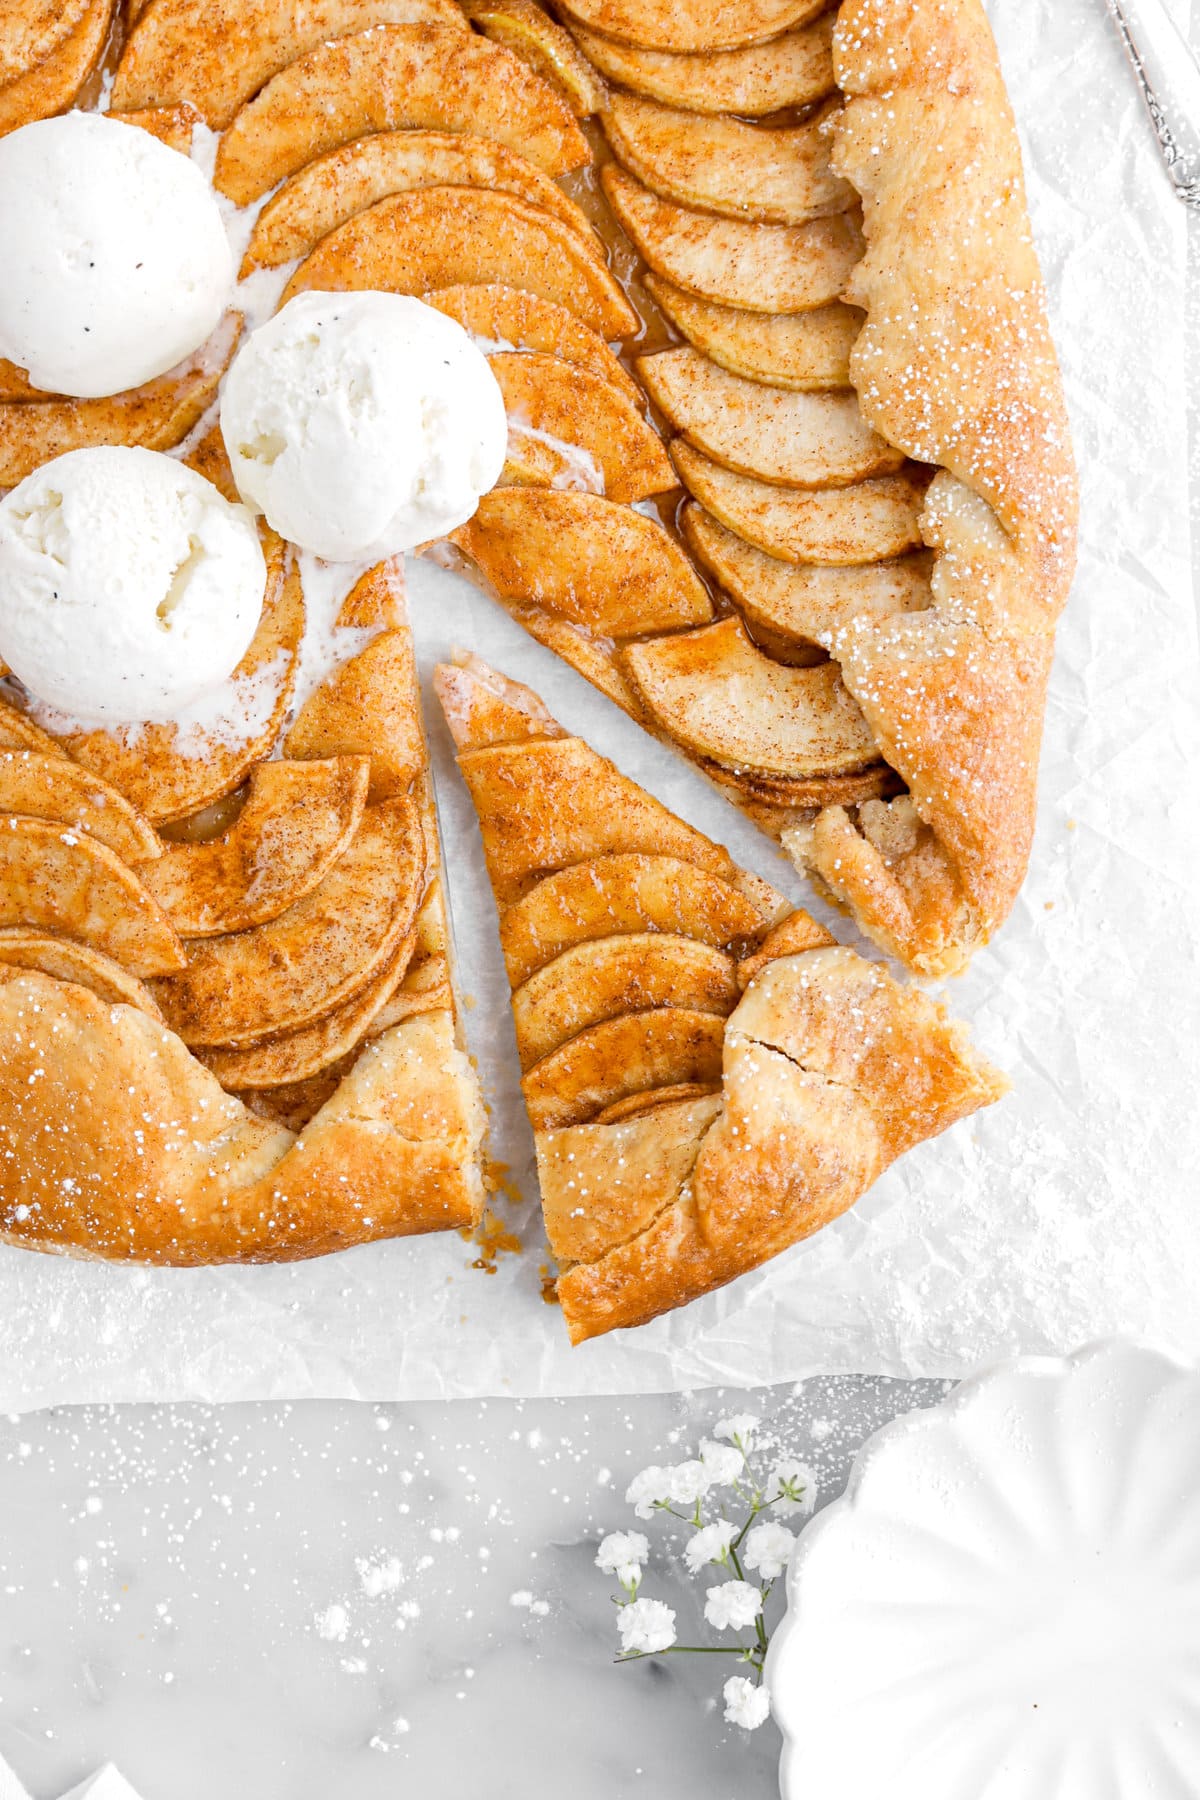 cropped overhead image of slice of apple galette on parchment paper with three scoops of ice cream on galette with bowl and flowers beside.